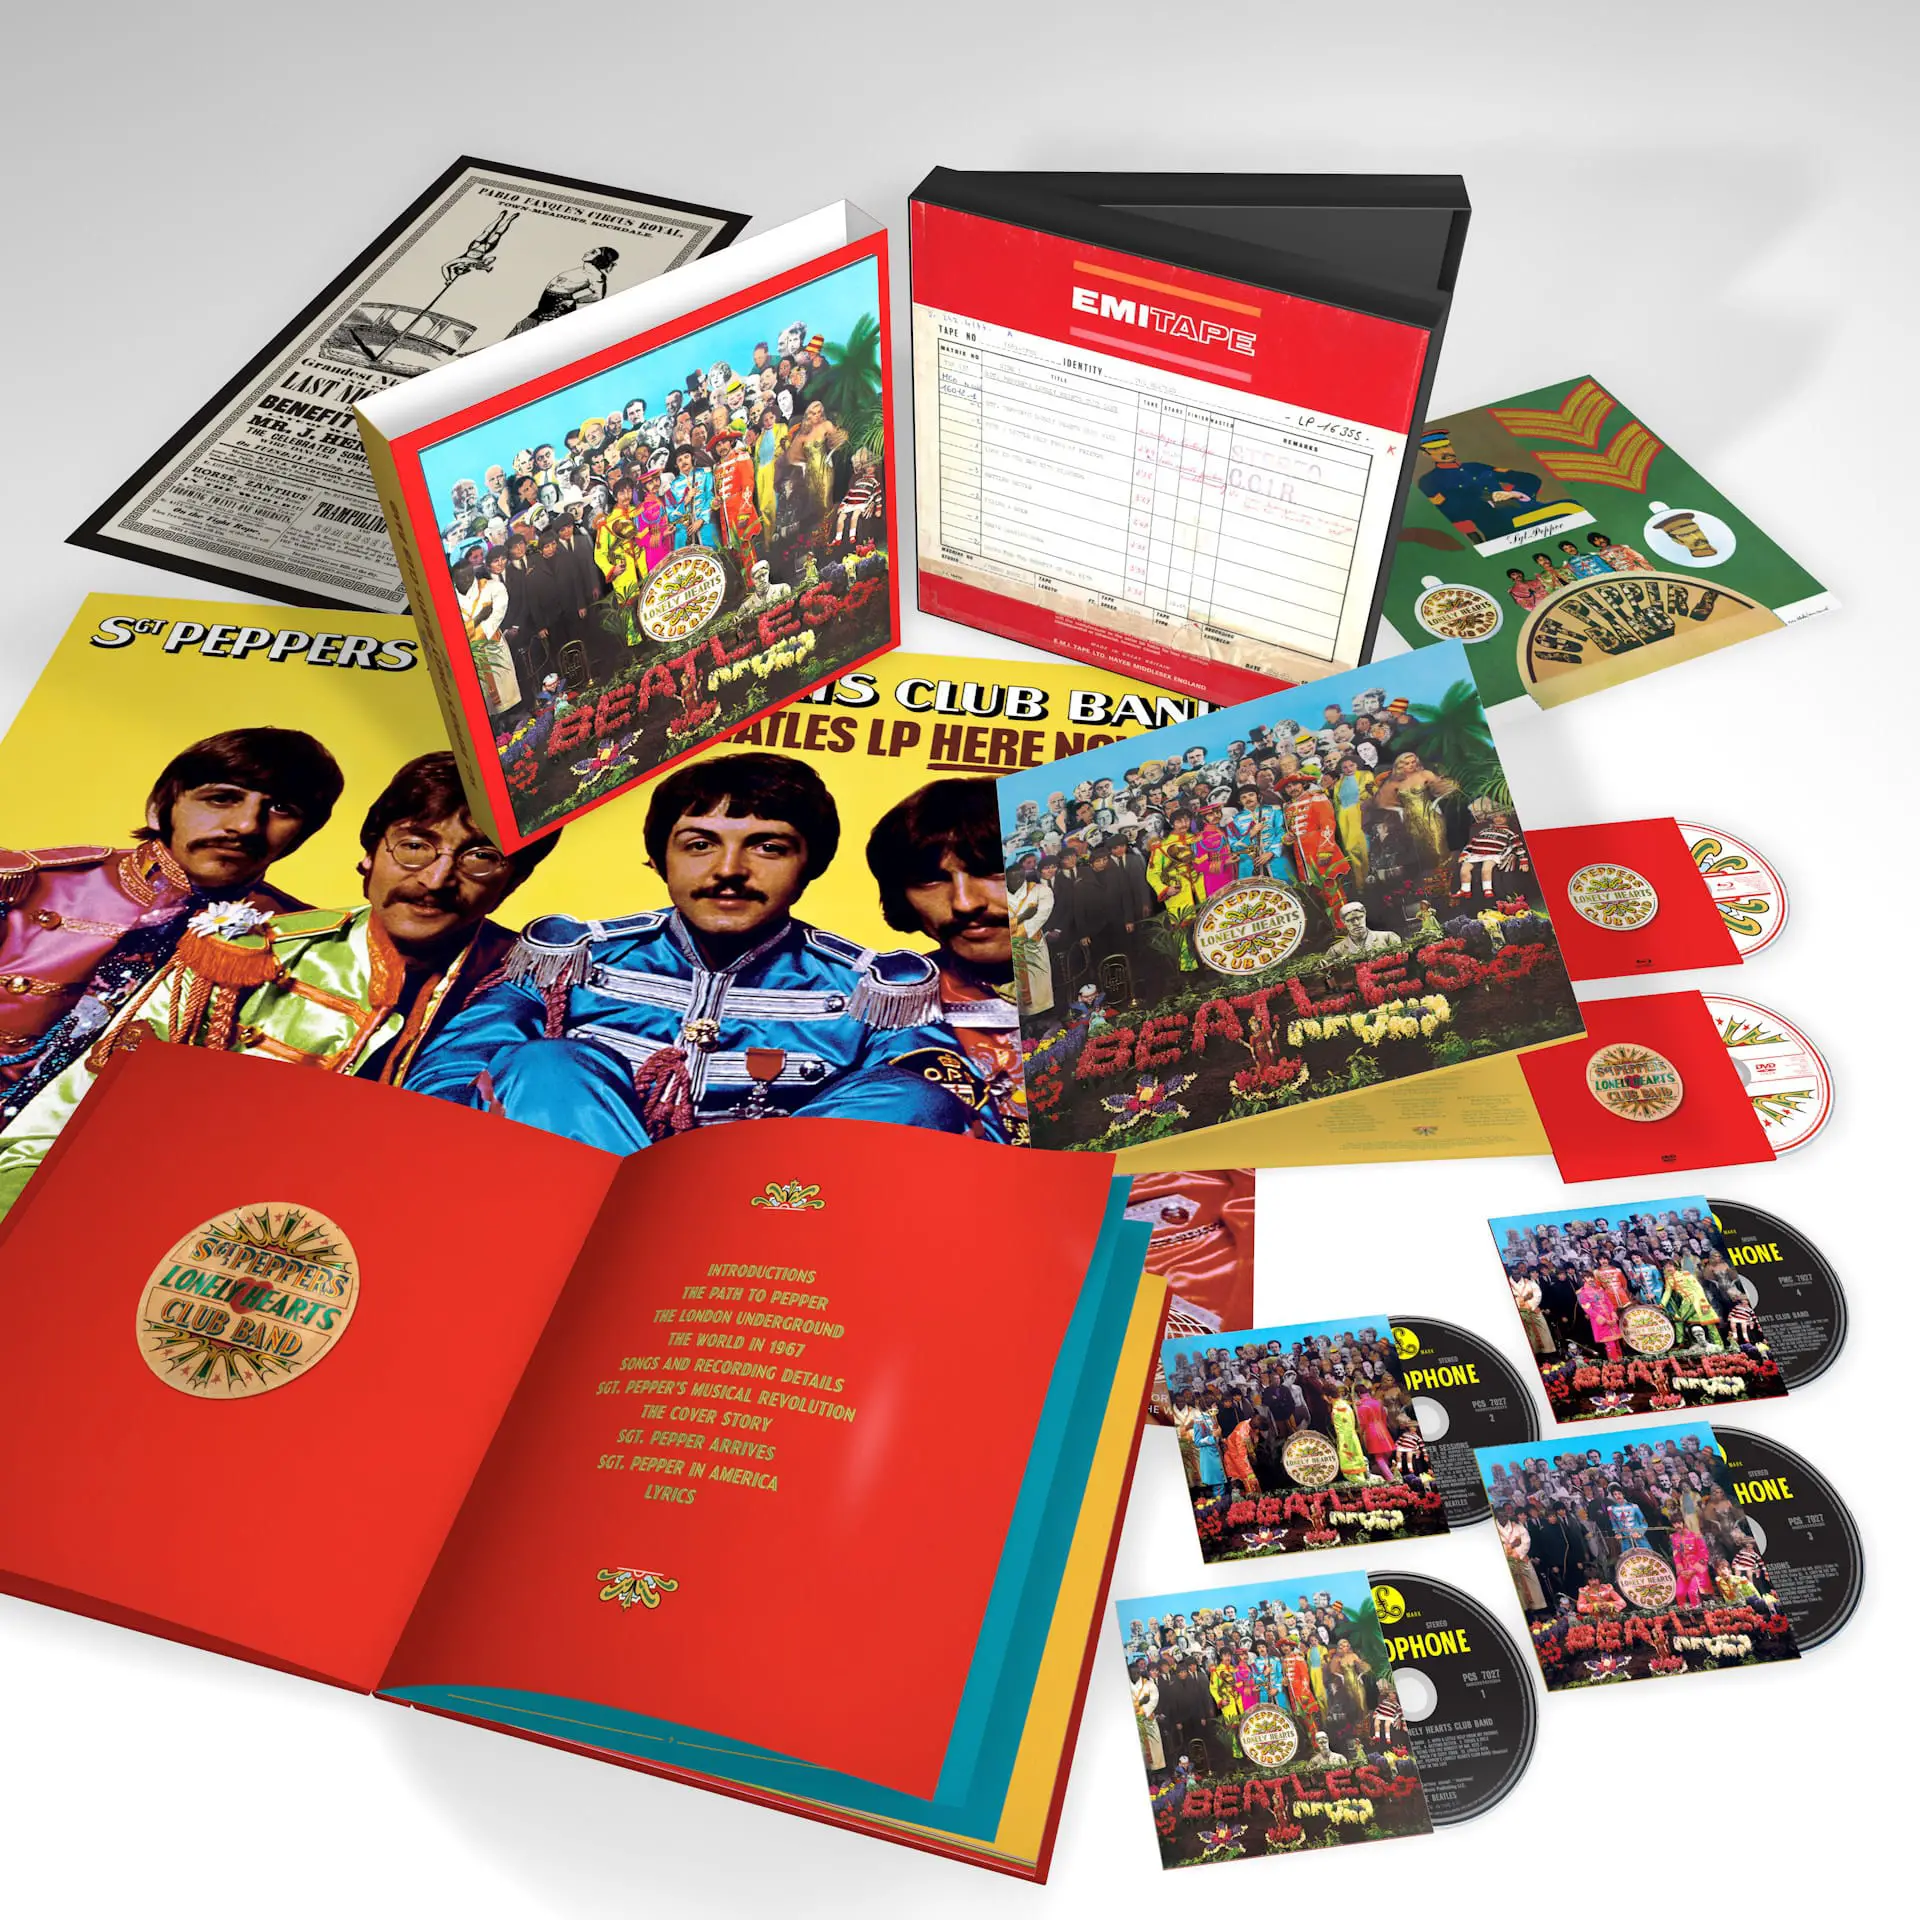 The Beatles Celebrate ‘Sgt. Pepper’s Lonely Hearts Club Band’ #SgtPepper